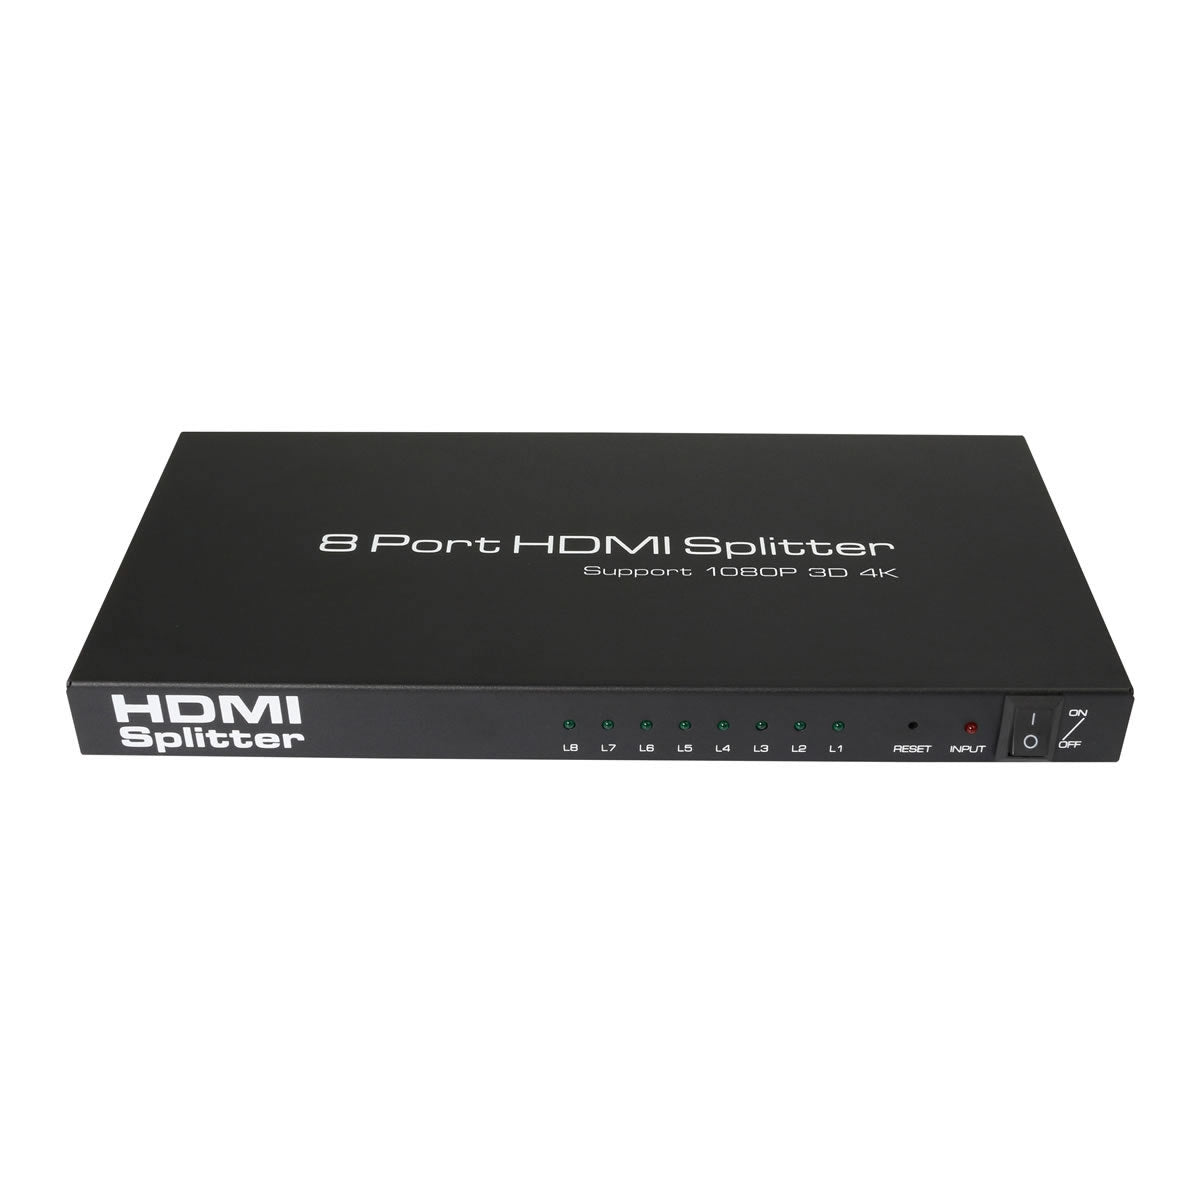 16-6808-4 HDMI 4K Splitter 1 In 8 Out, HDCP 1.4, Supports 3D, 4Kx2K@30Hz